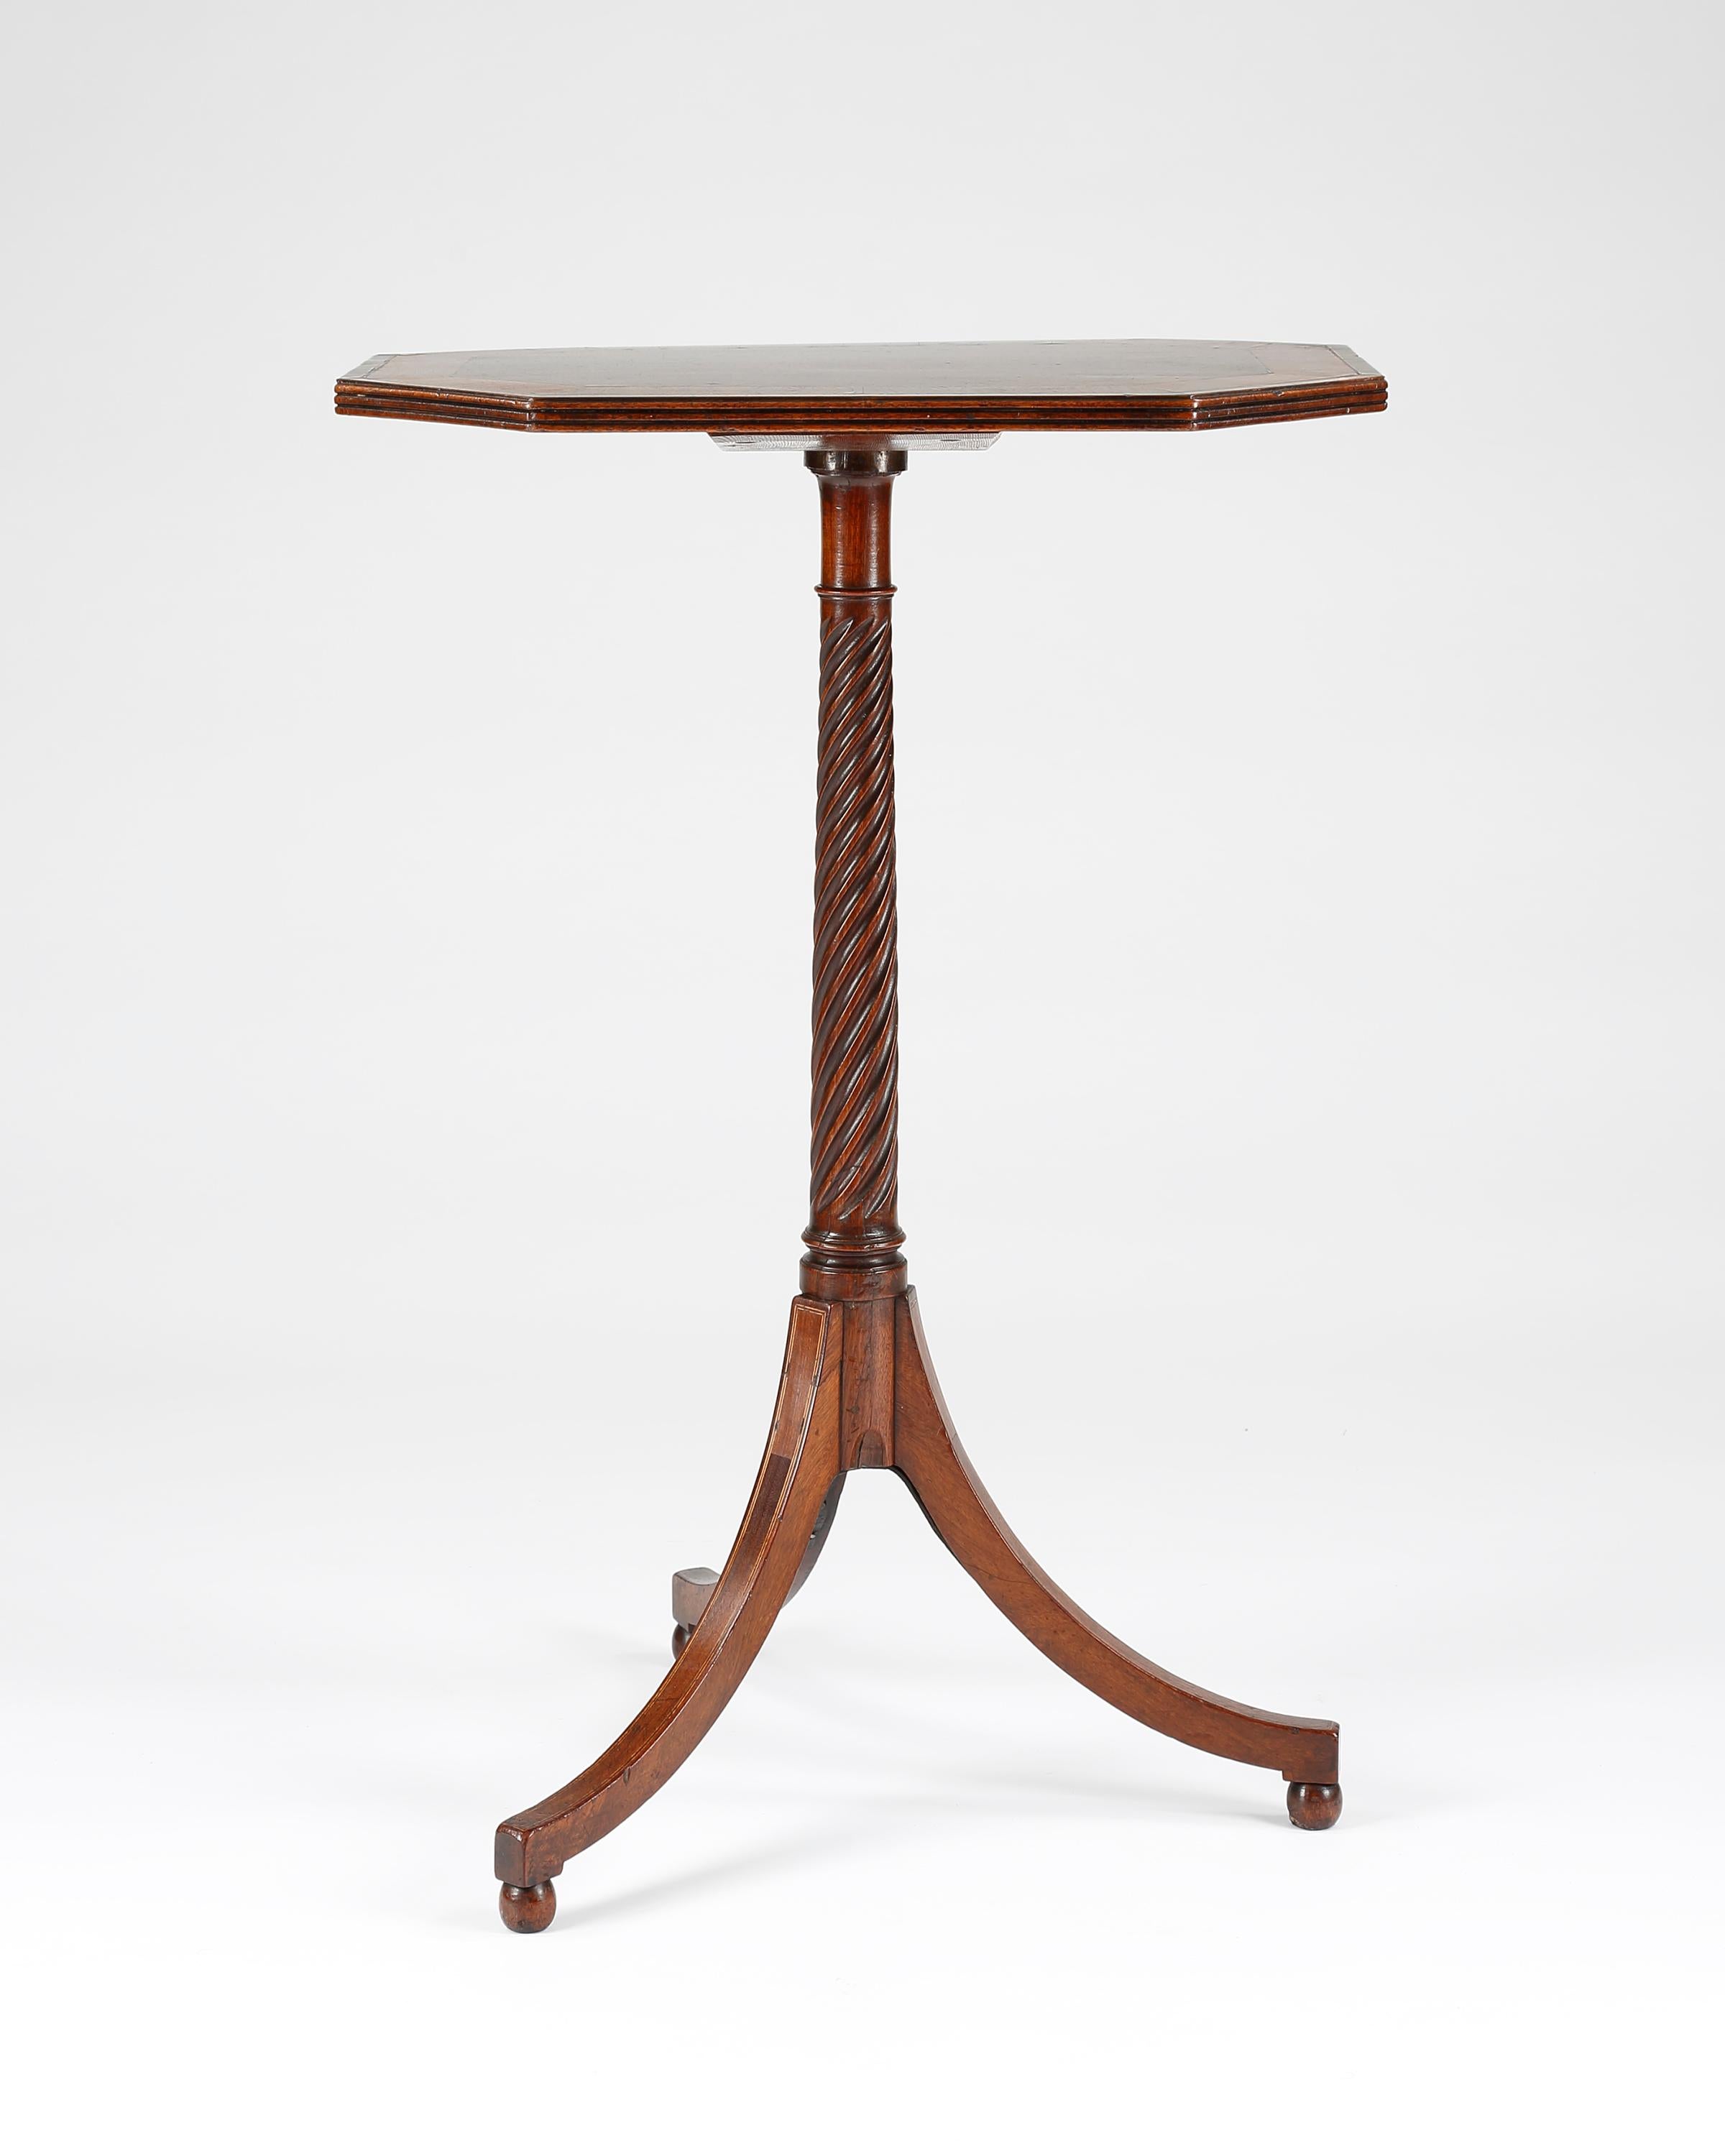 A fine elegant 18th century mahogany occasional table crossbanded in purple-hart and satinwood. The whole is strung throughout in ebony and boxwood. The octagonal top is supported on a spiral shaft and down-swept tripod legs raised on small ball